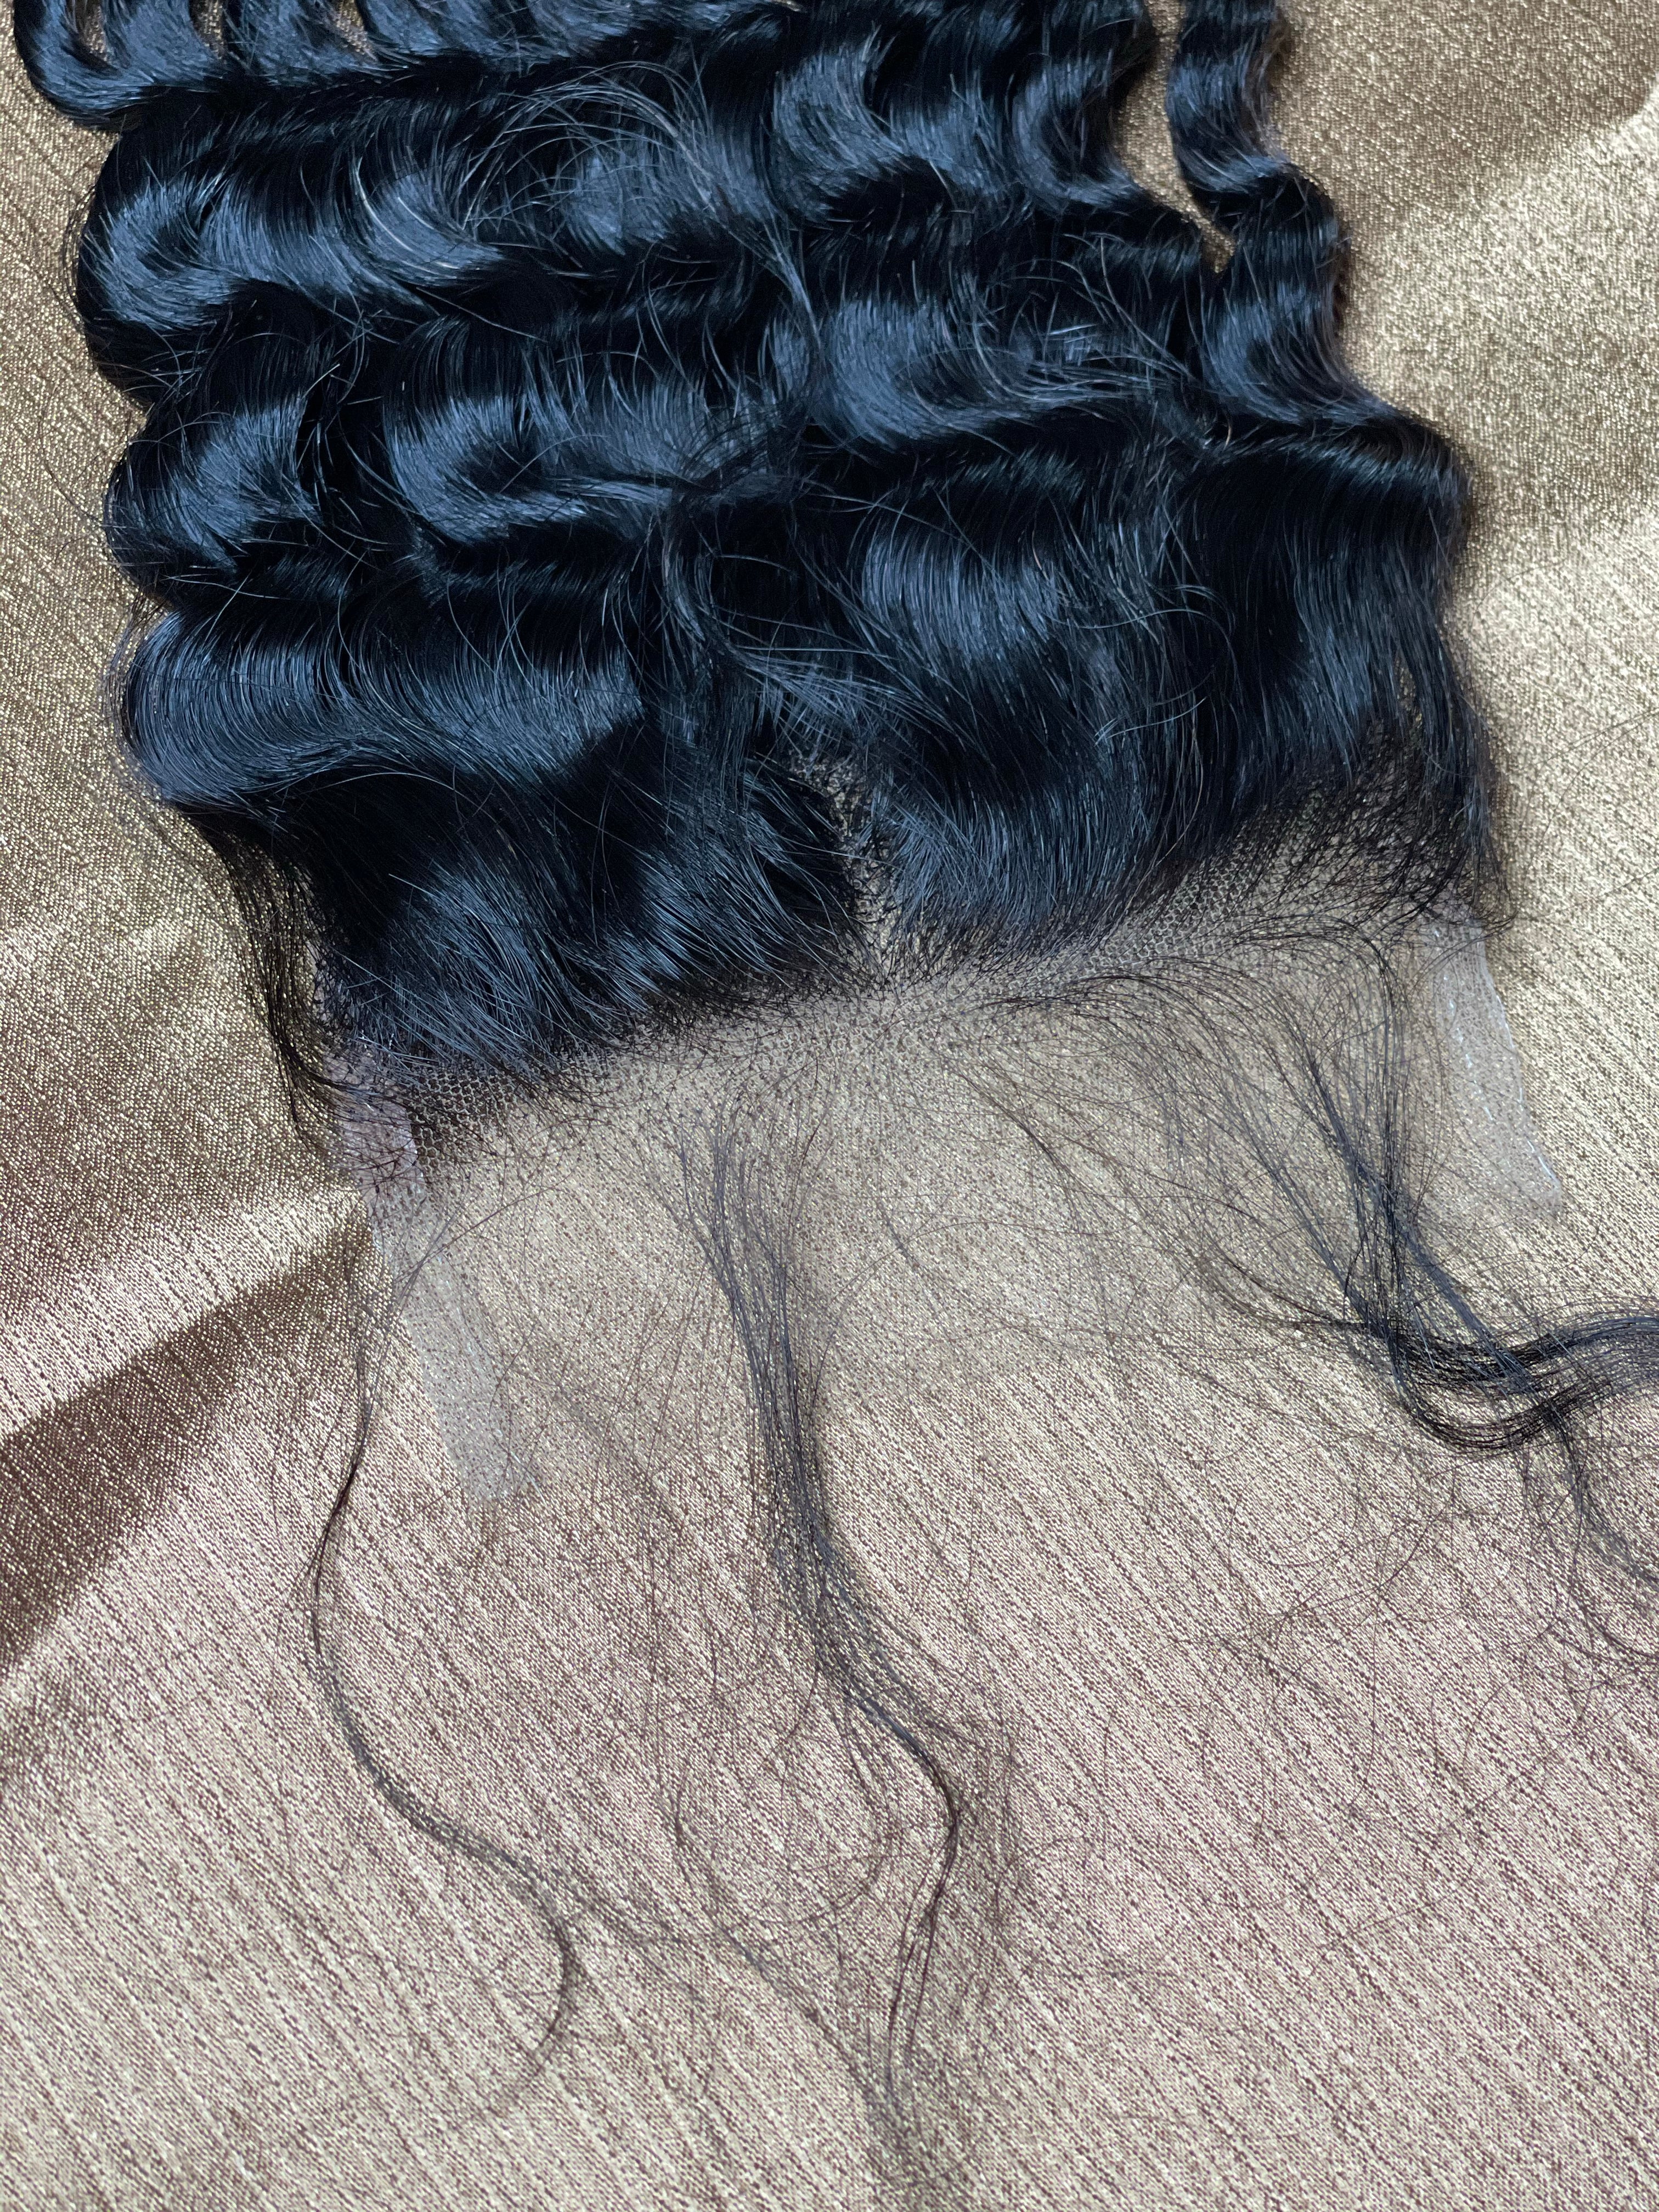 FRENCH CURLY RAW CLOSURE